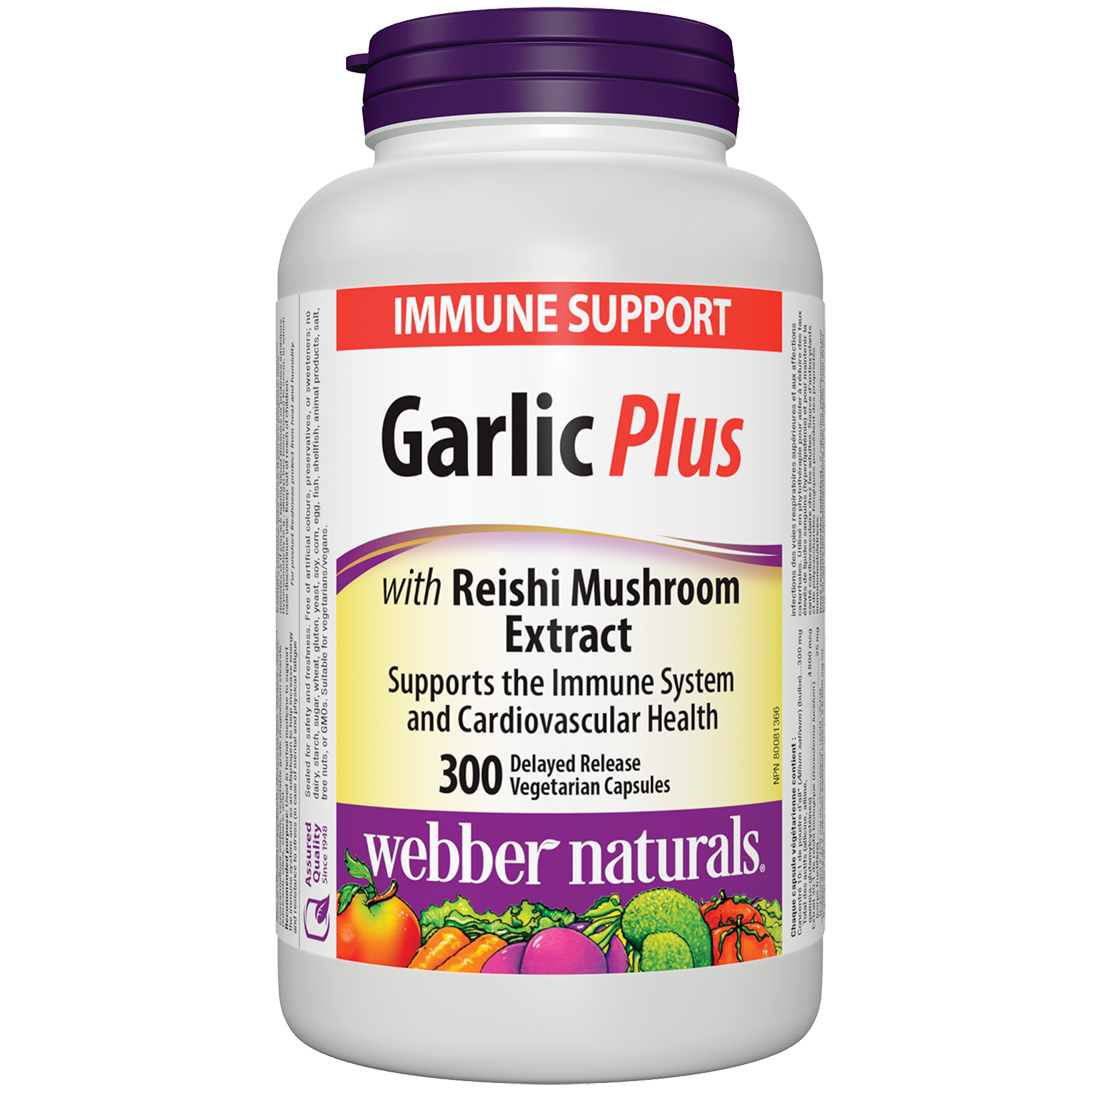 Garlic Plus with Reishi Mushroom Extract for Webber Naturals|v|hi-res|WN5252